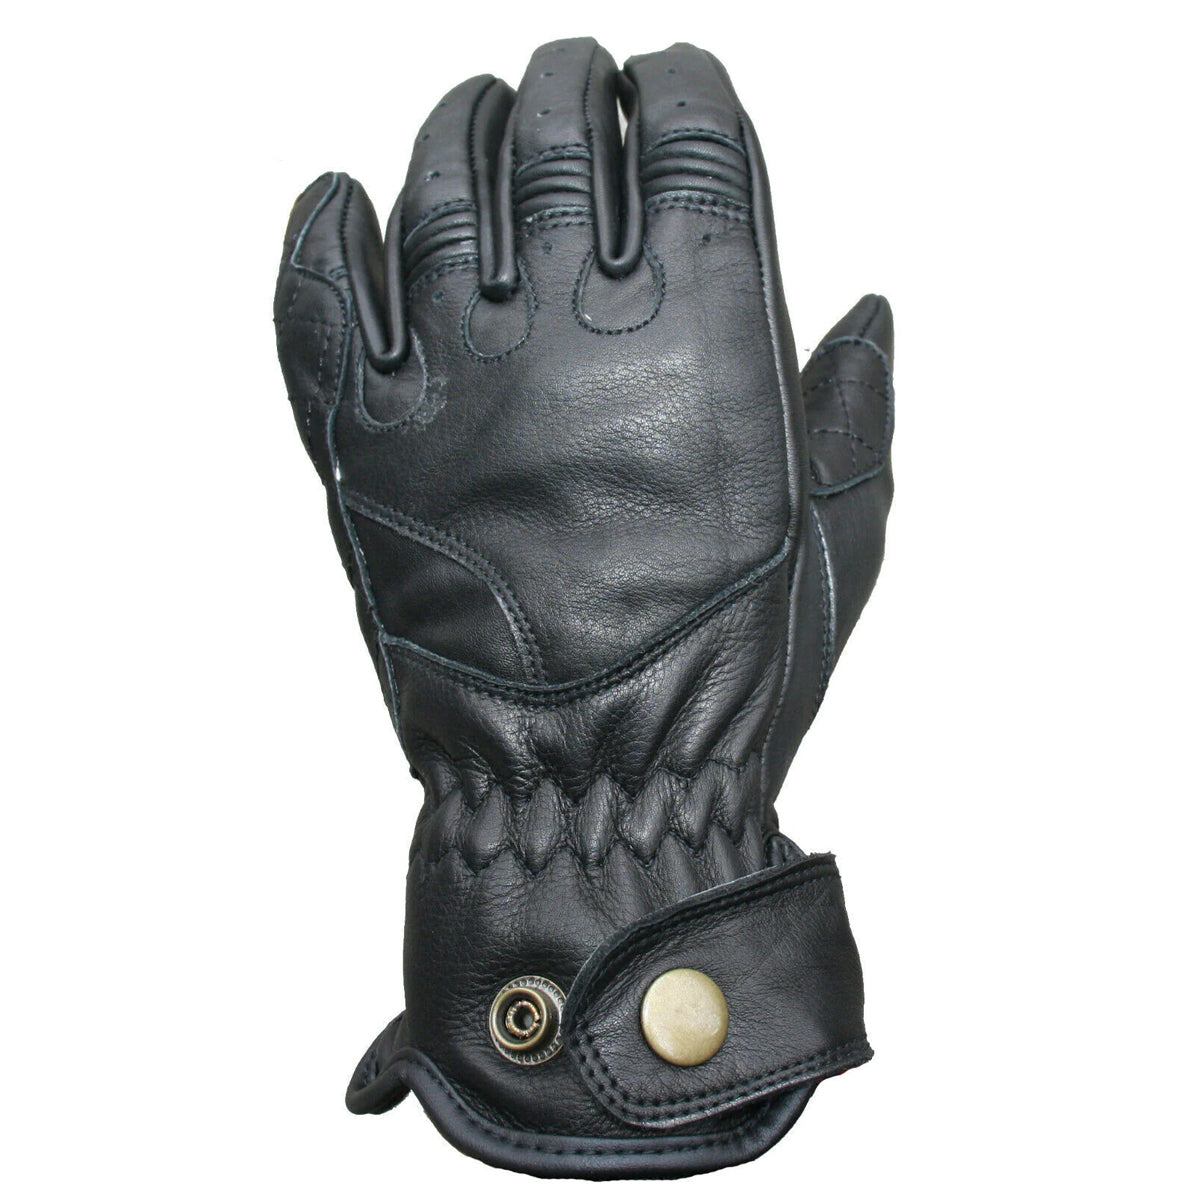 Roadhouse Leather Button Gloves Ladies Soft Black